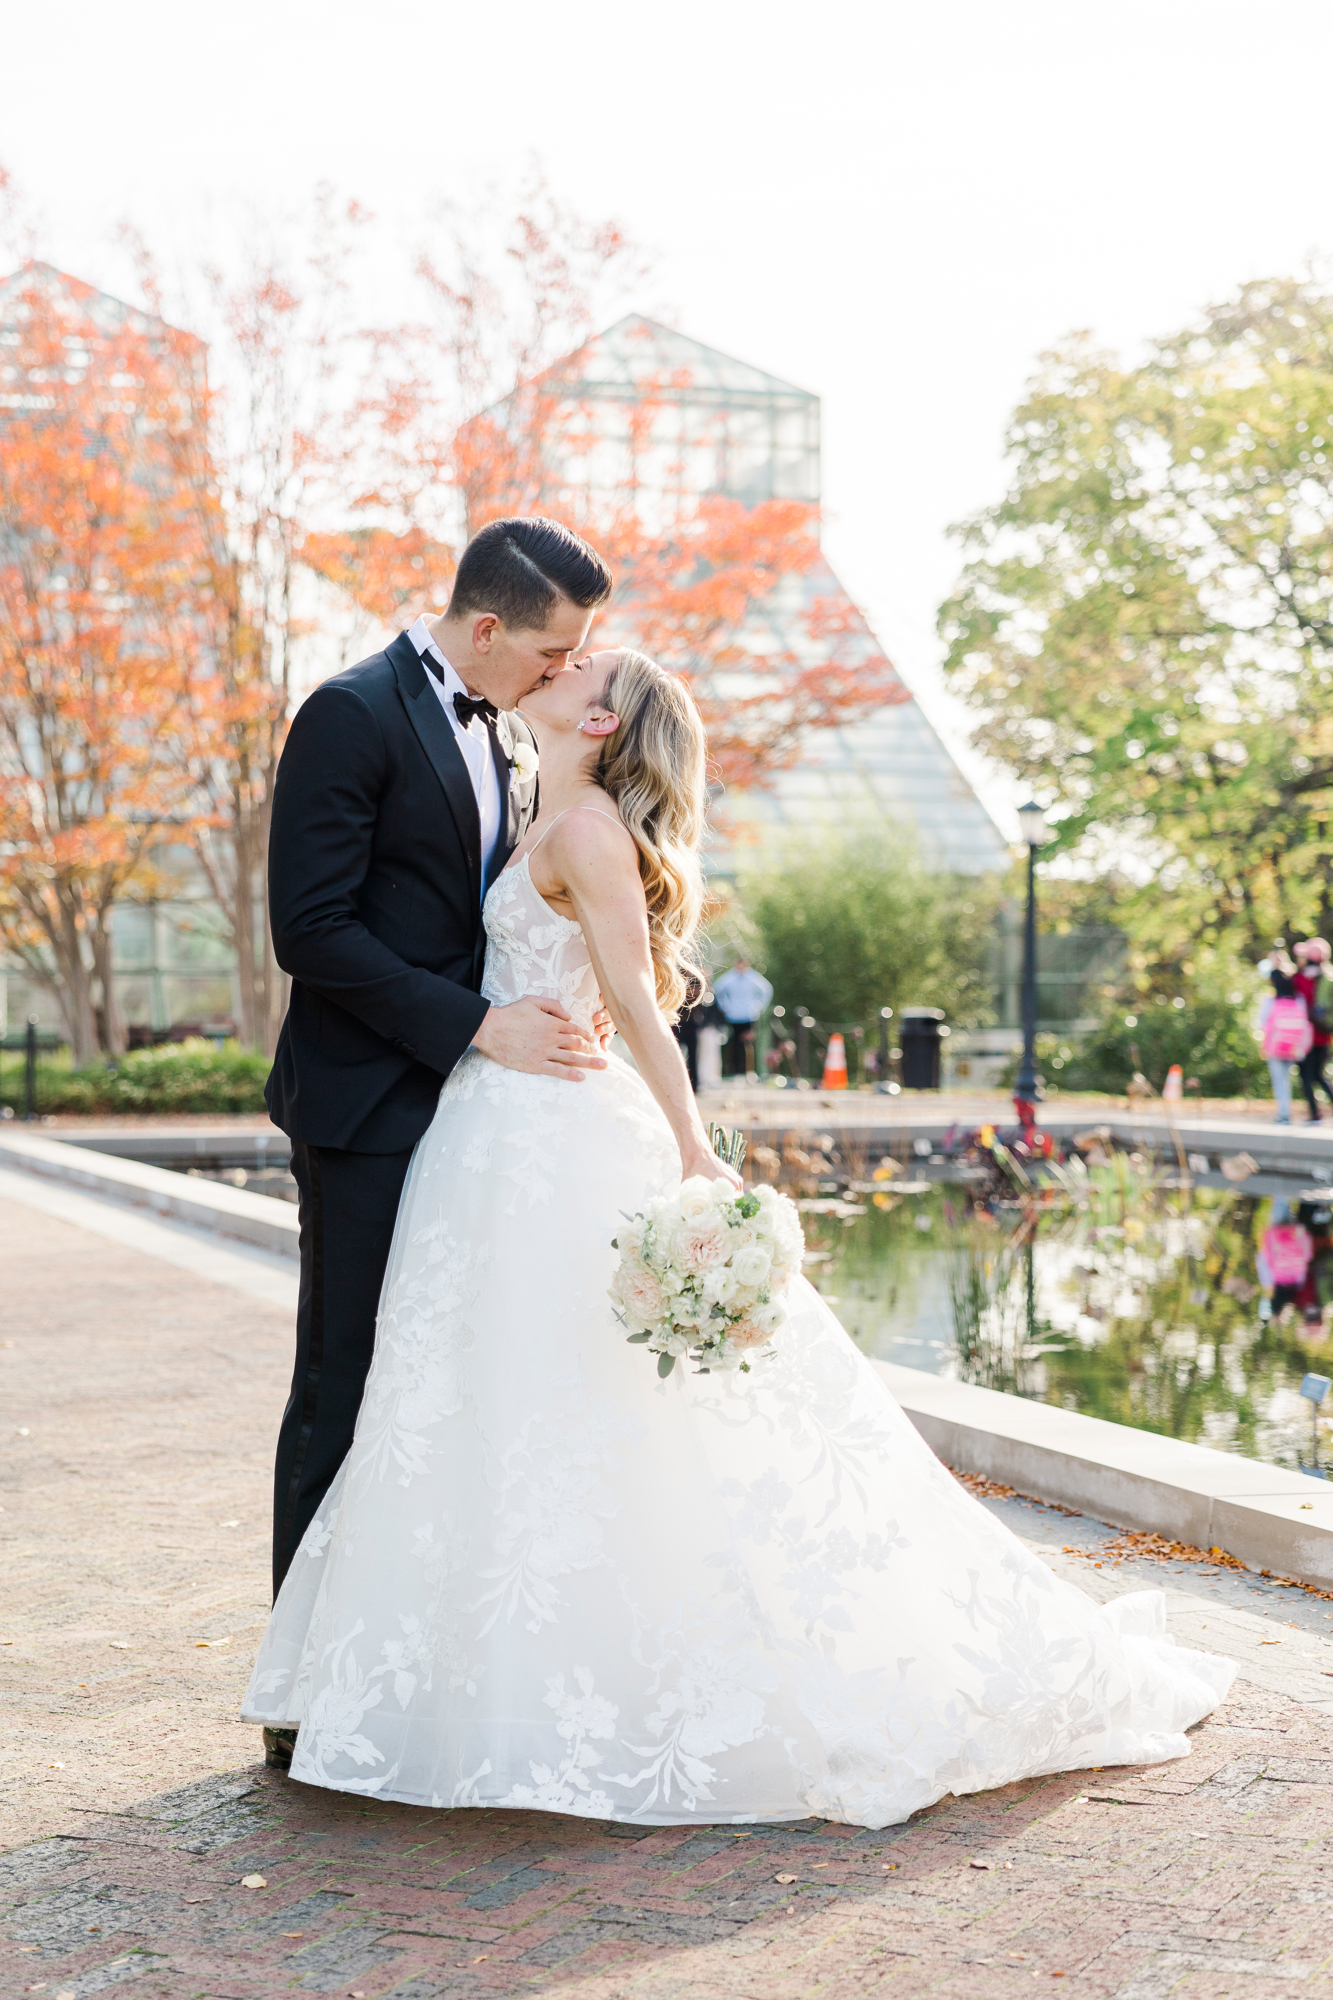 Awesome Outdoor New York Wedding Venues